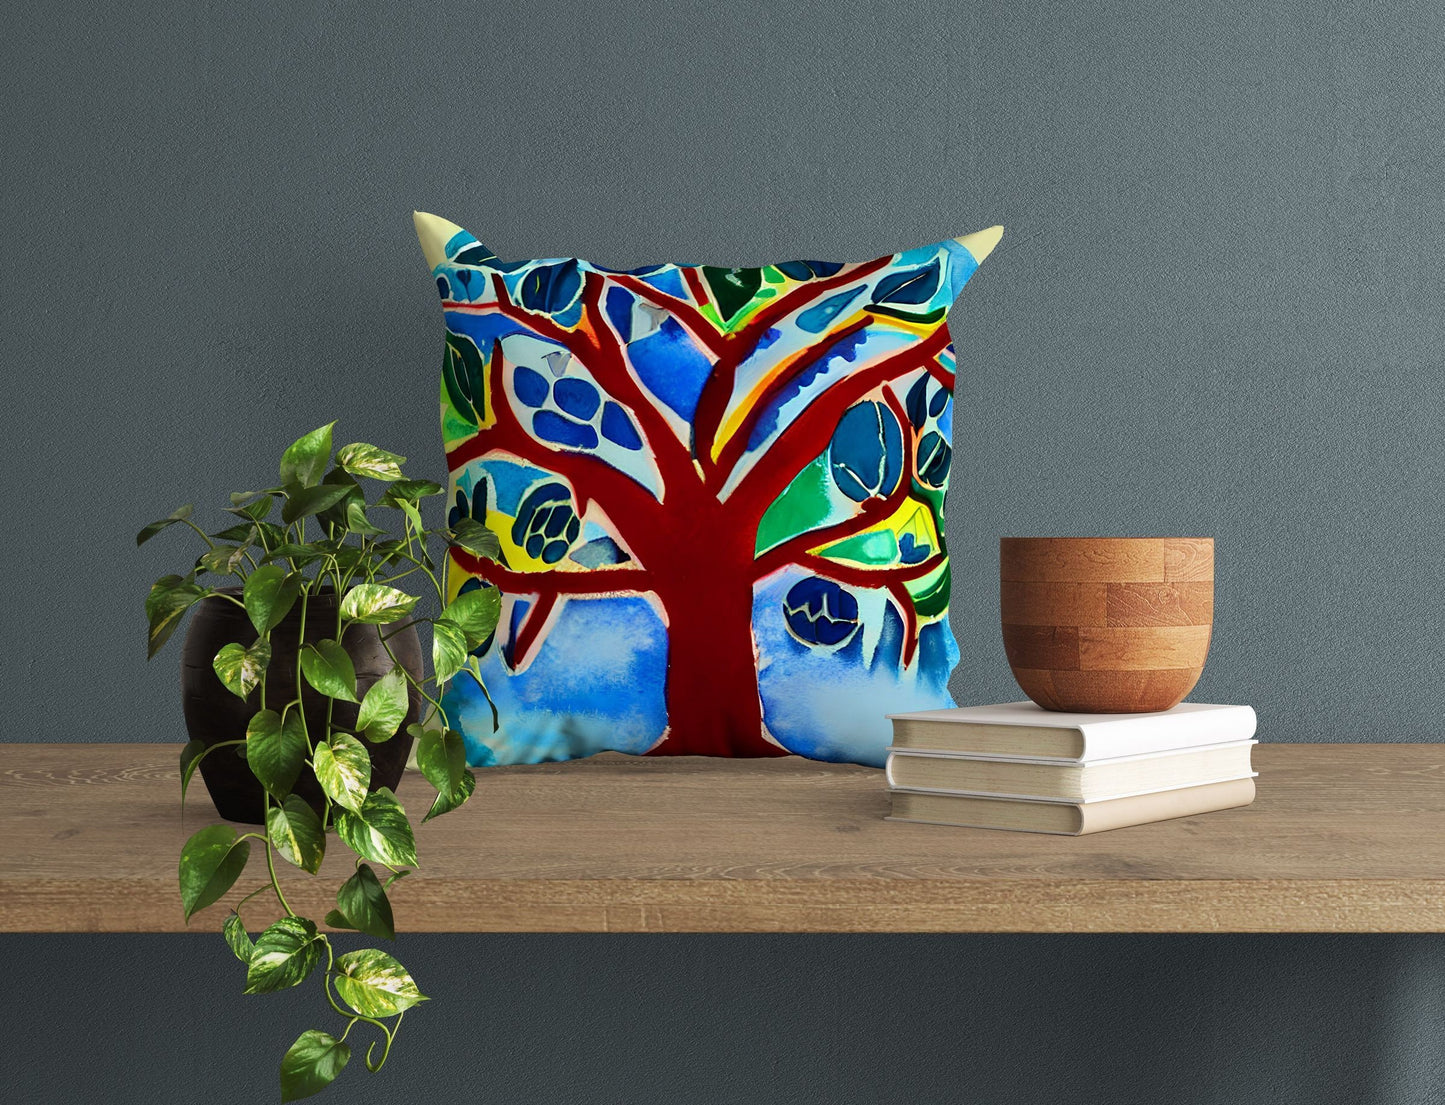 Tree Of Life Throw Pillow Cover, Abstract Throw Pillow Cover, Artist Pillow, Colorful Pillow Case, Contemporary Pillow, Square Pillow